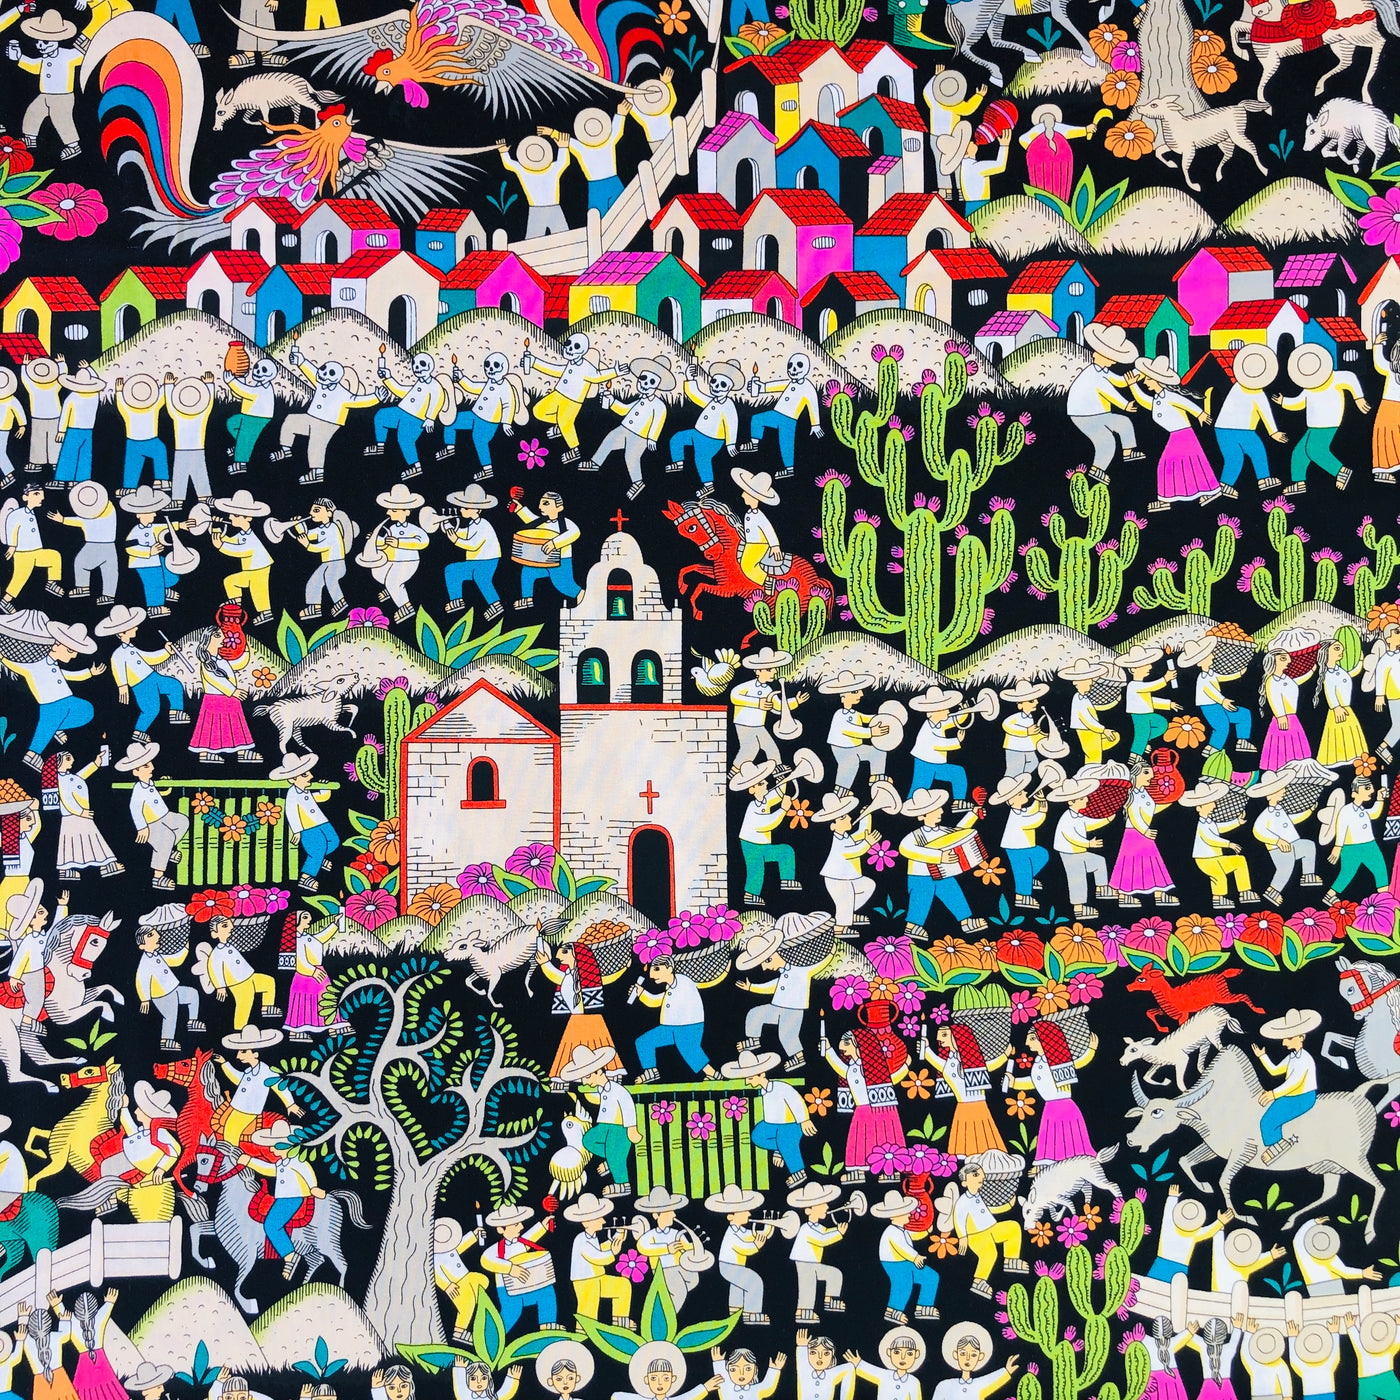 Alexander Henry Fabrics in Puebla (black/bright multicolored) pattern. This pattern has a village scene with trees and the everyday life of the people who live there